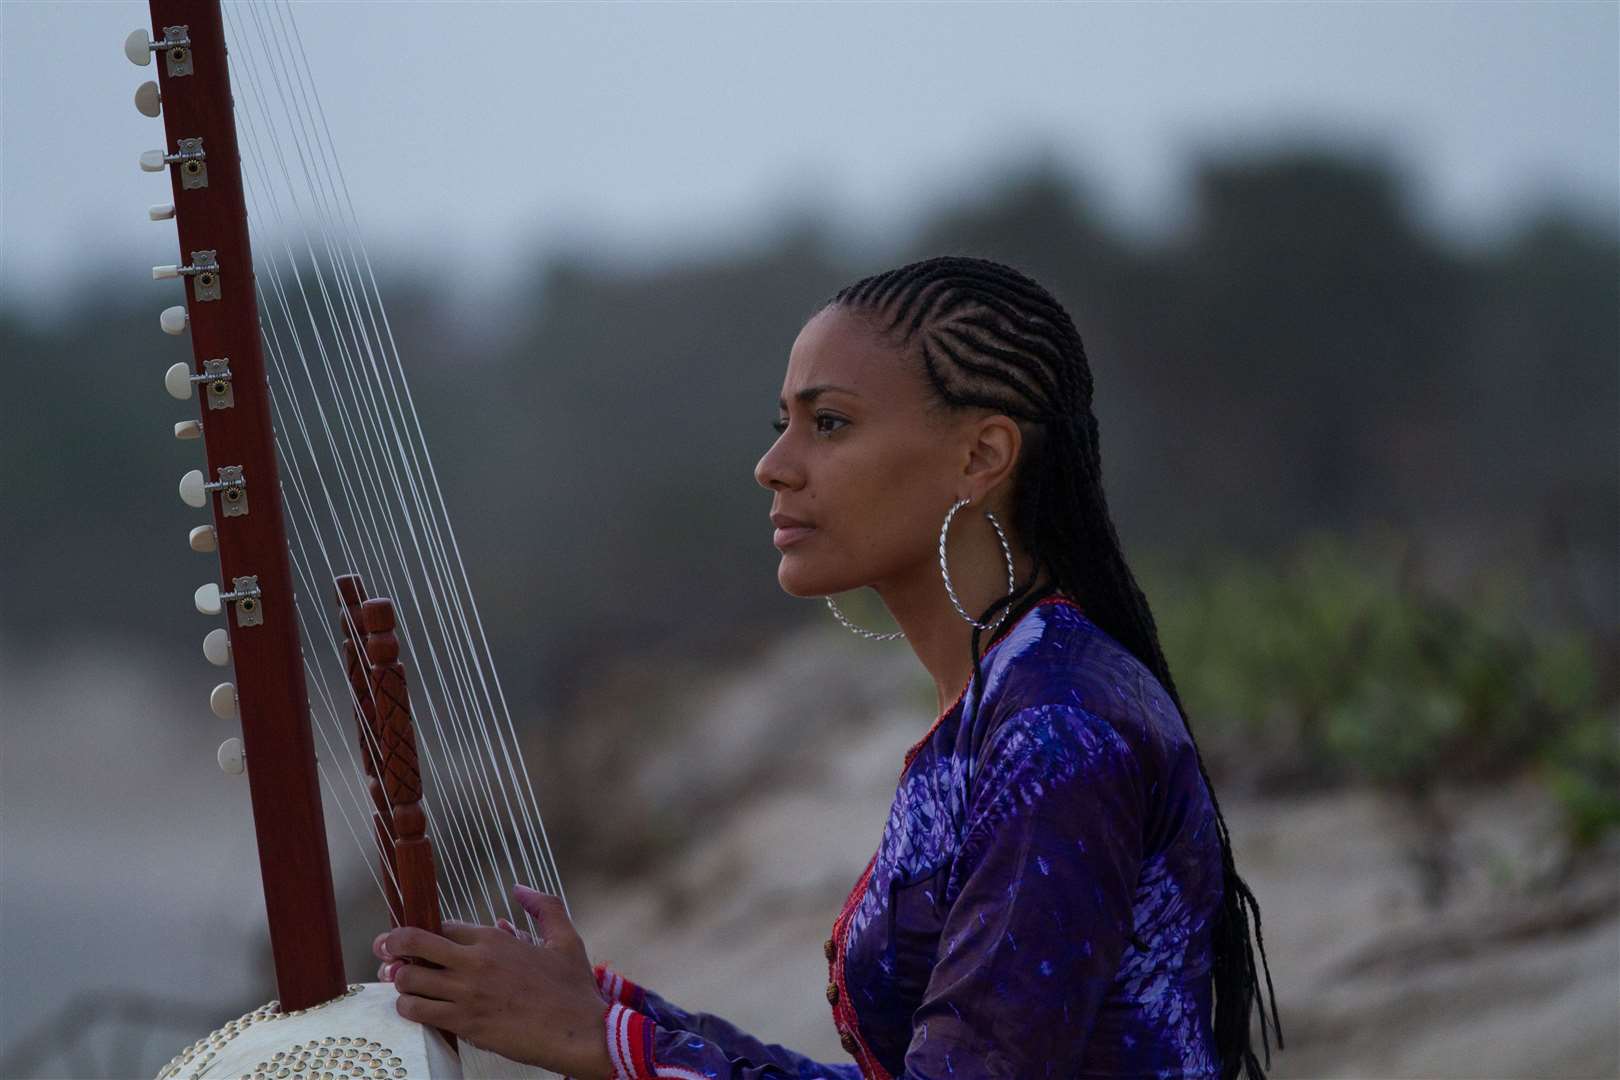 Sona Jobarteh with traditional 21-stringed West African instrument the kora.